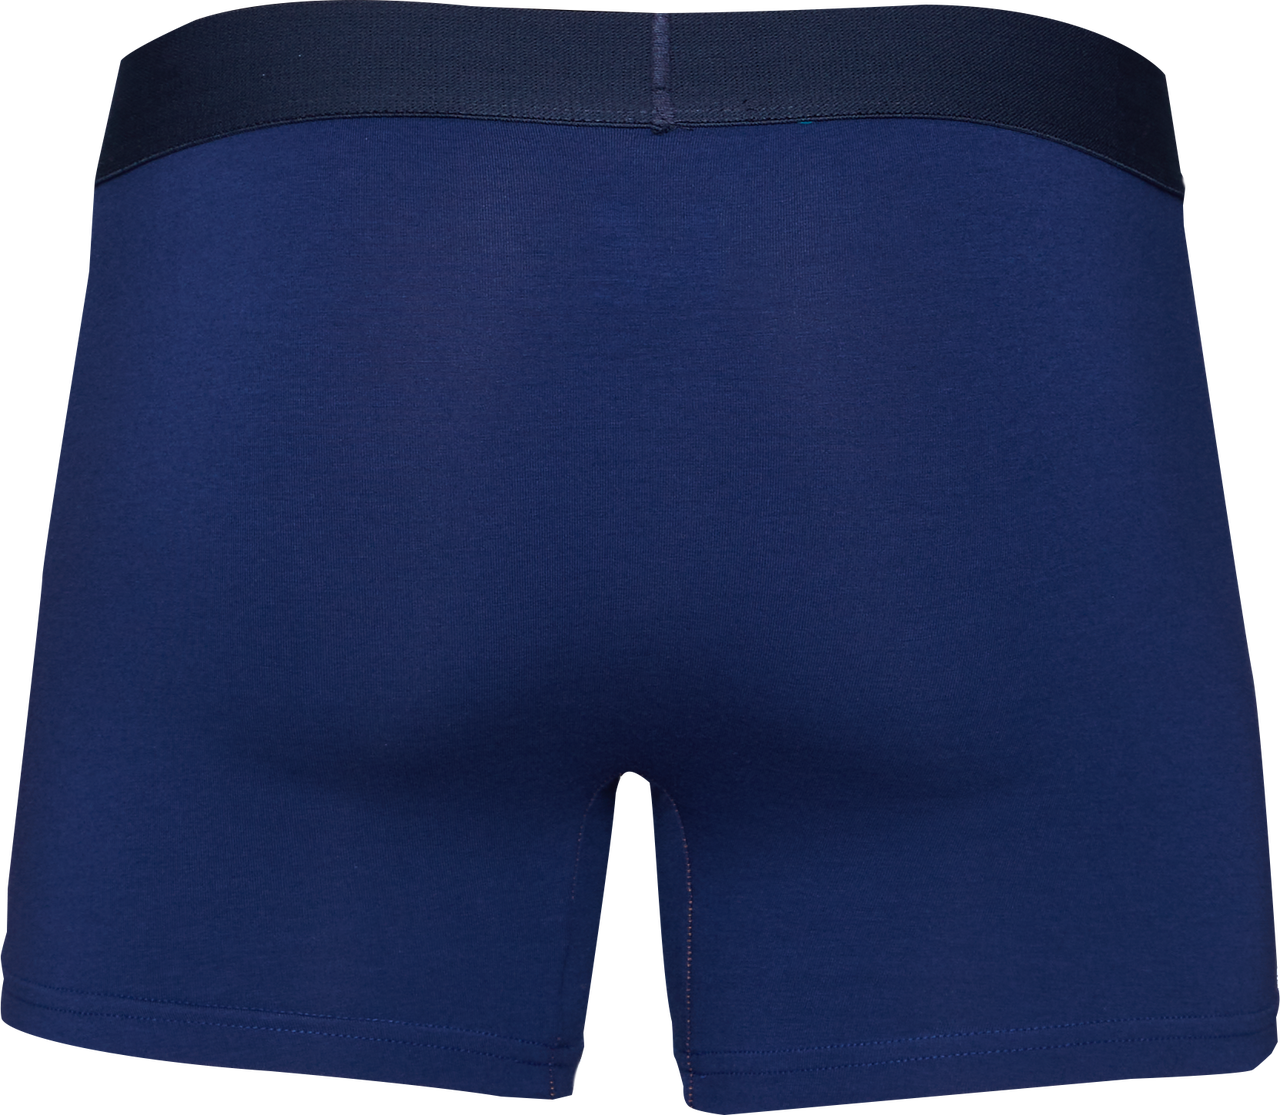 Boxer Brief w/ Fly in Deep Space Blue by Wood Underwear